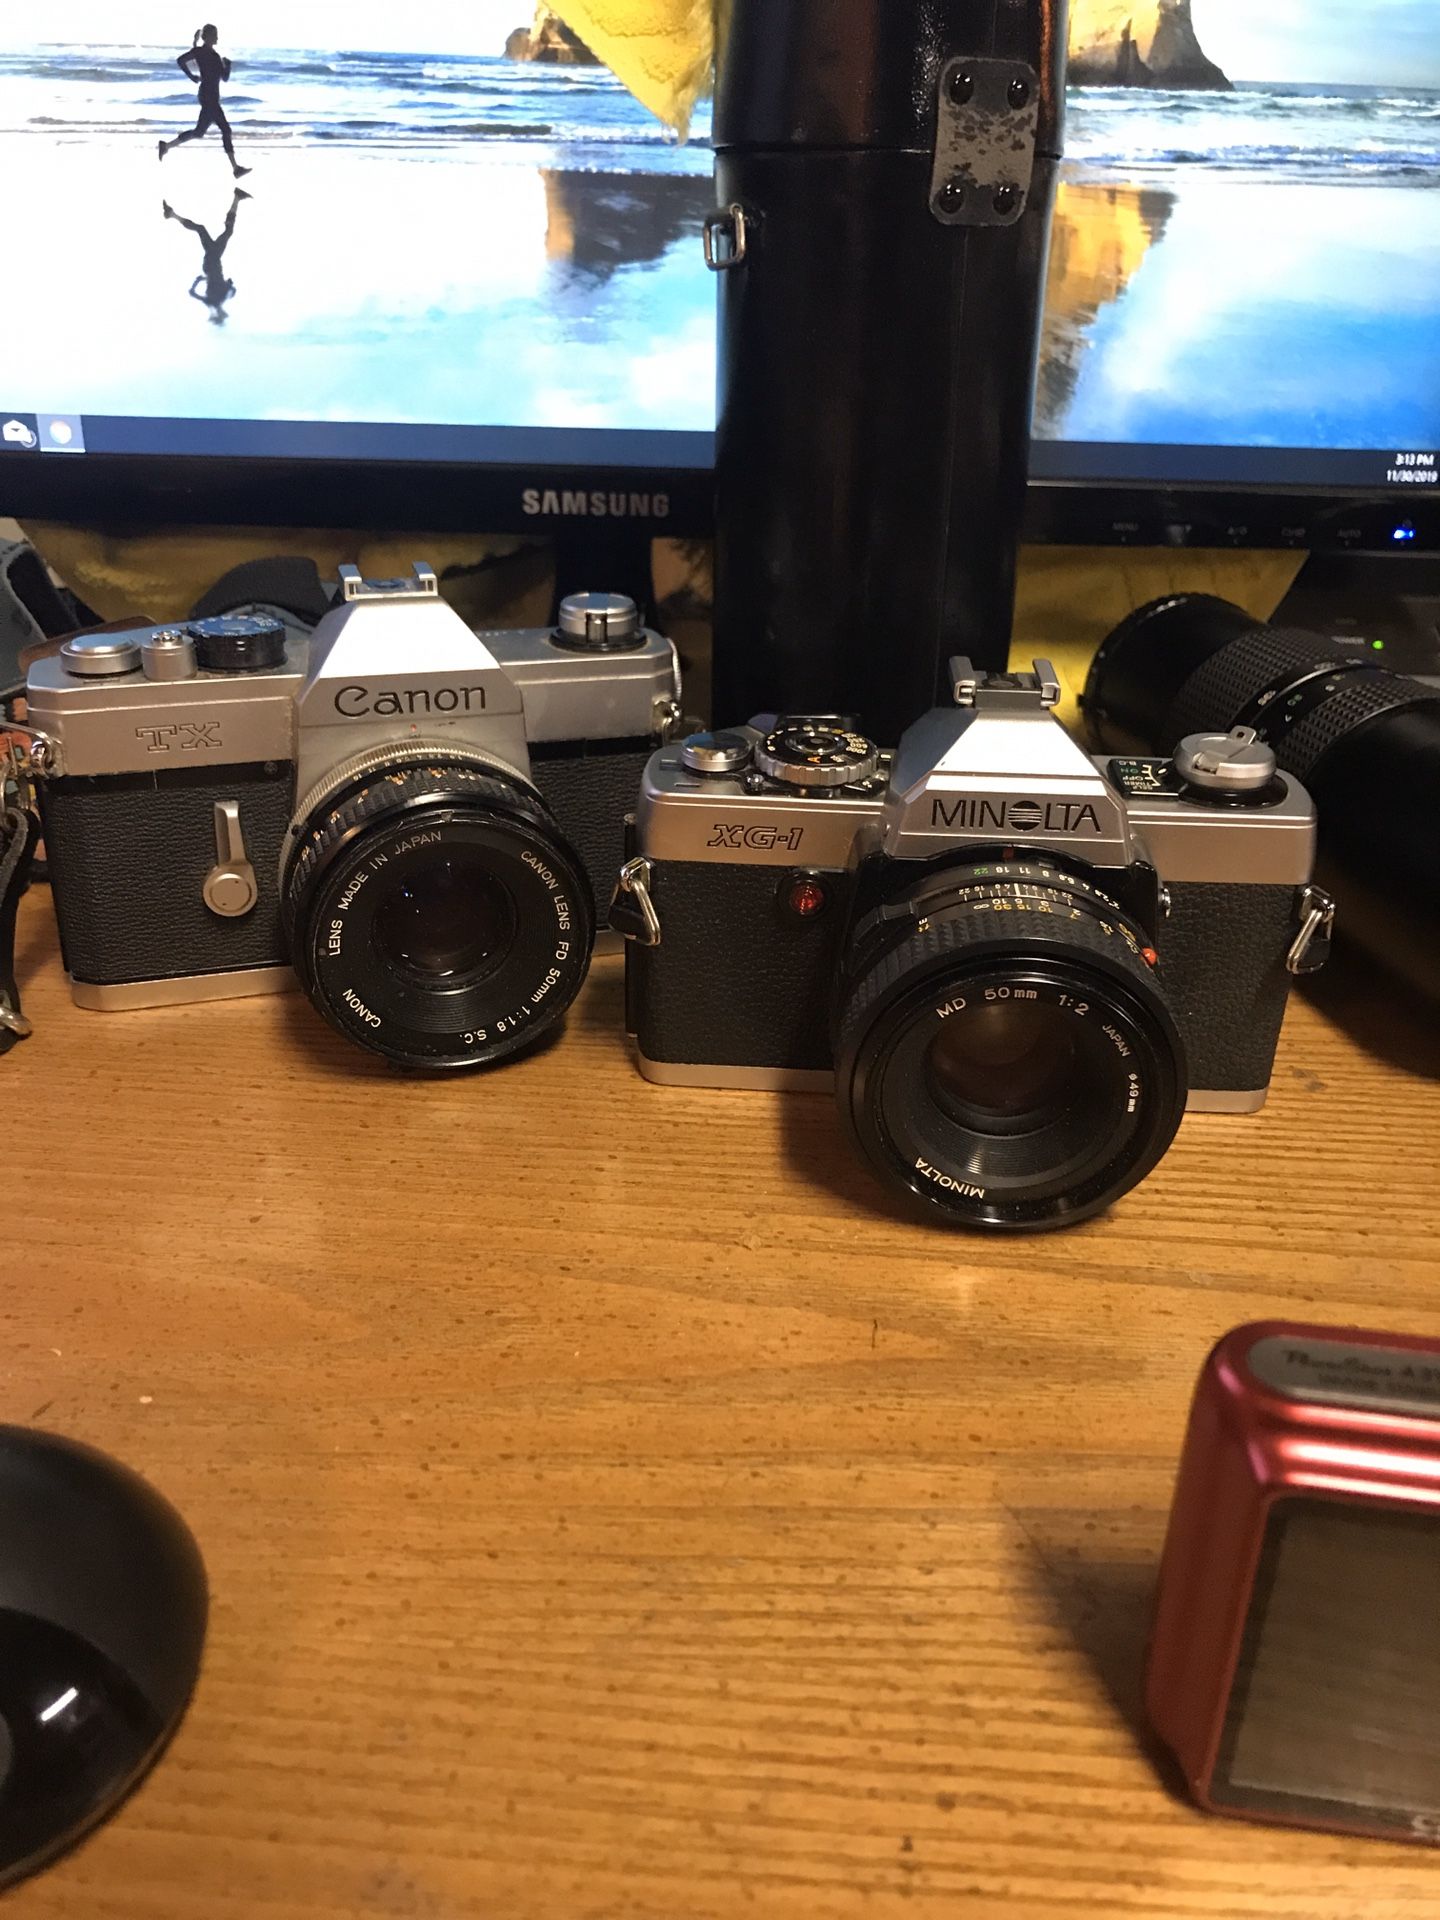 Canon TX AND Minolta Xg-1 and 3 lens